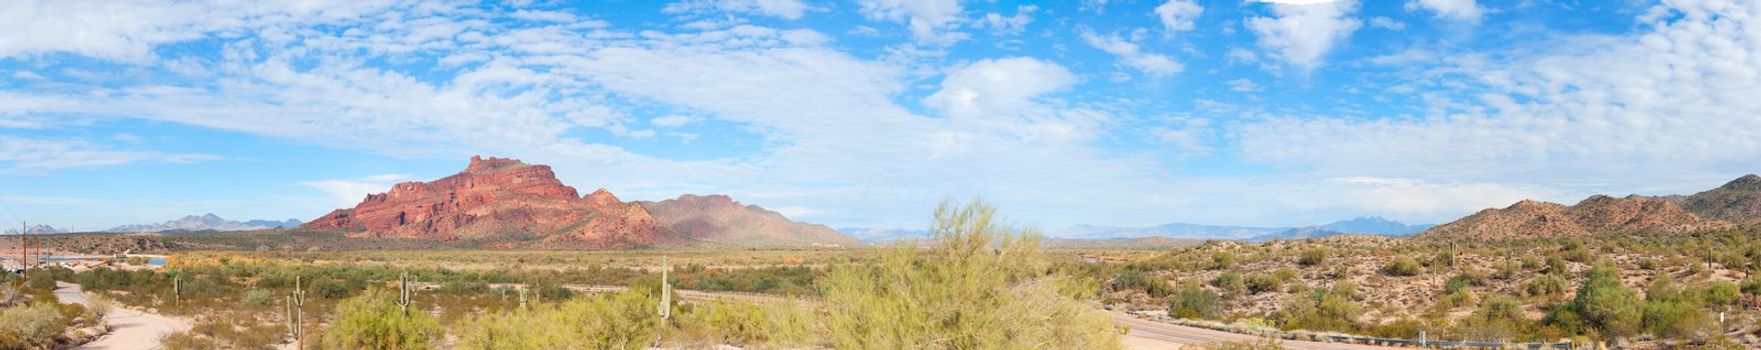 A panoramic shot of Red Mountain located near the lower Salt River in Arizona